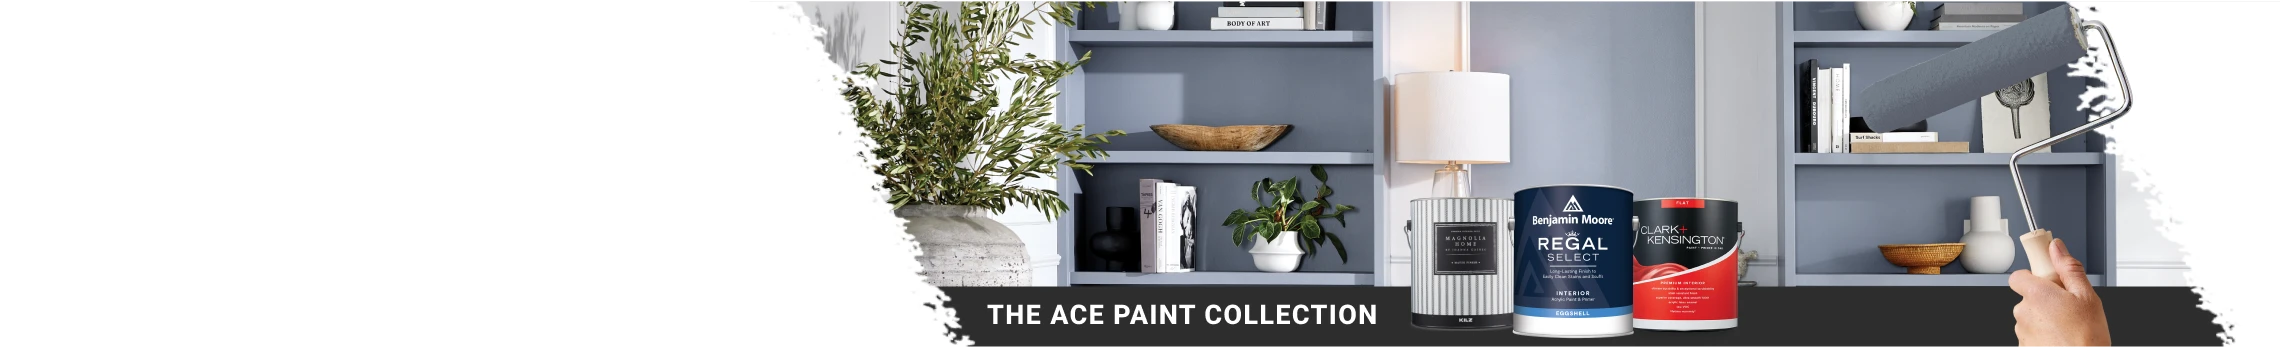 The Ace Paint Collection